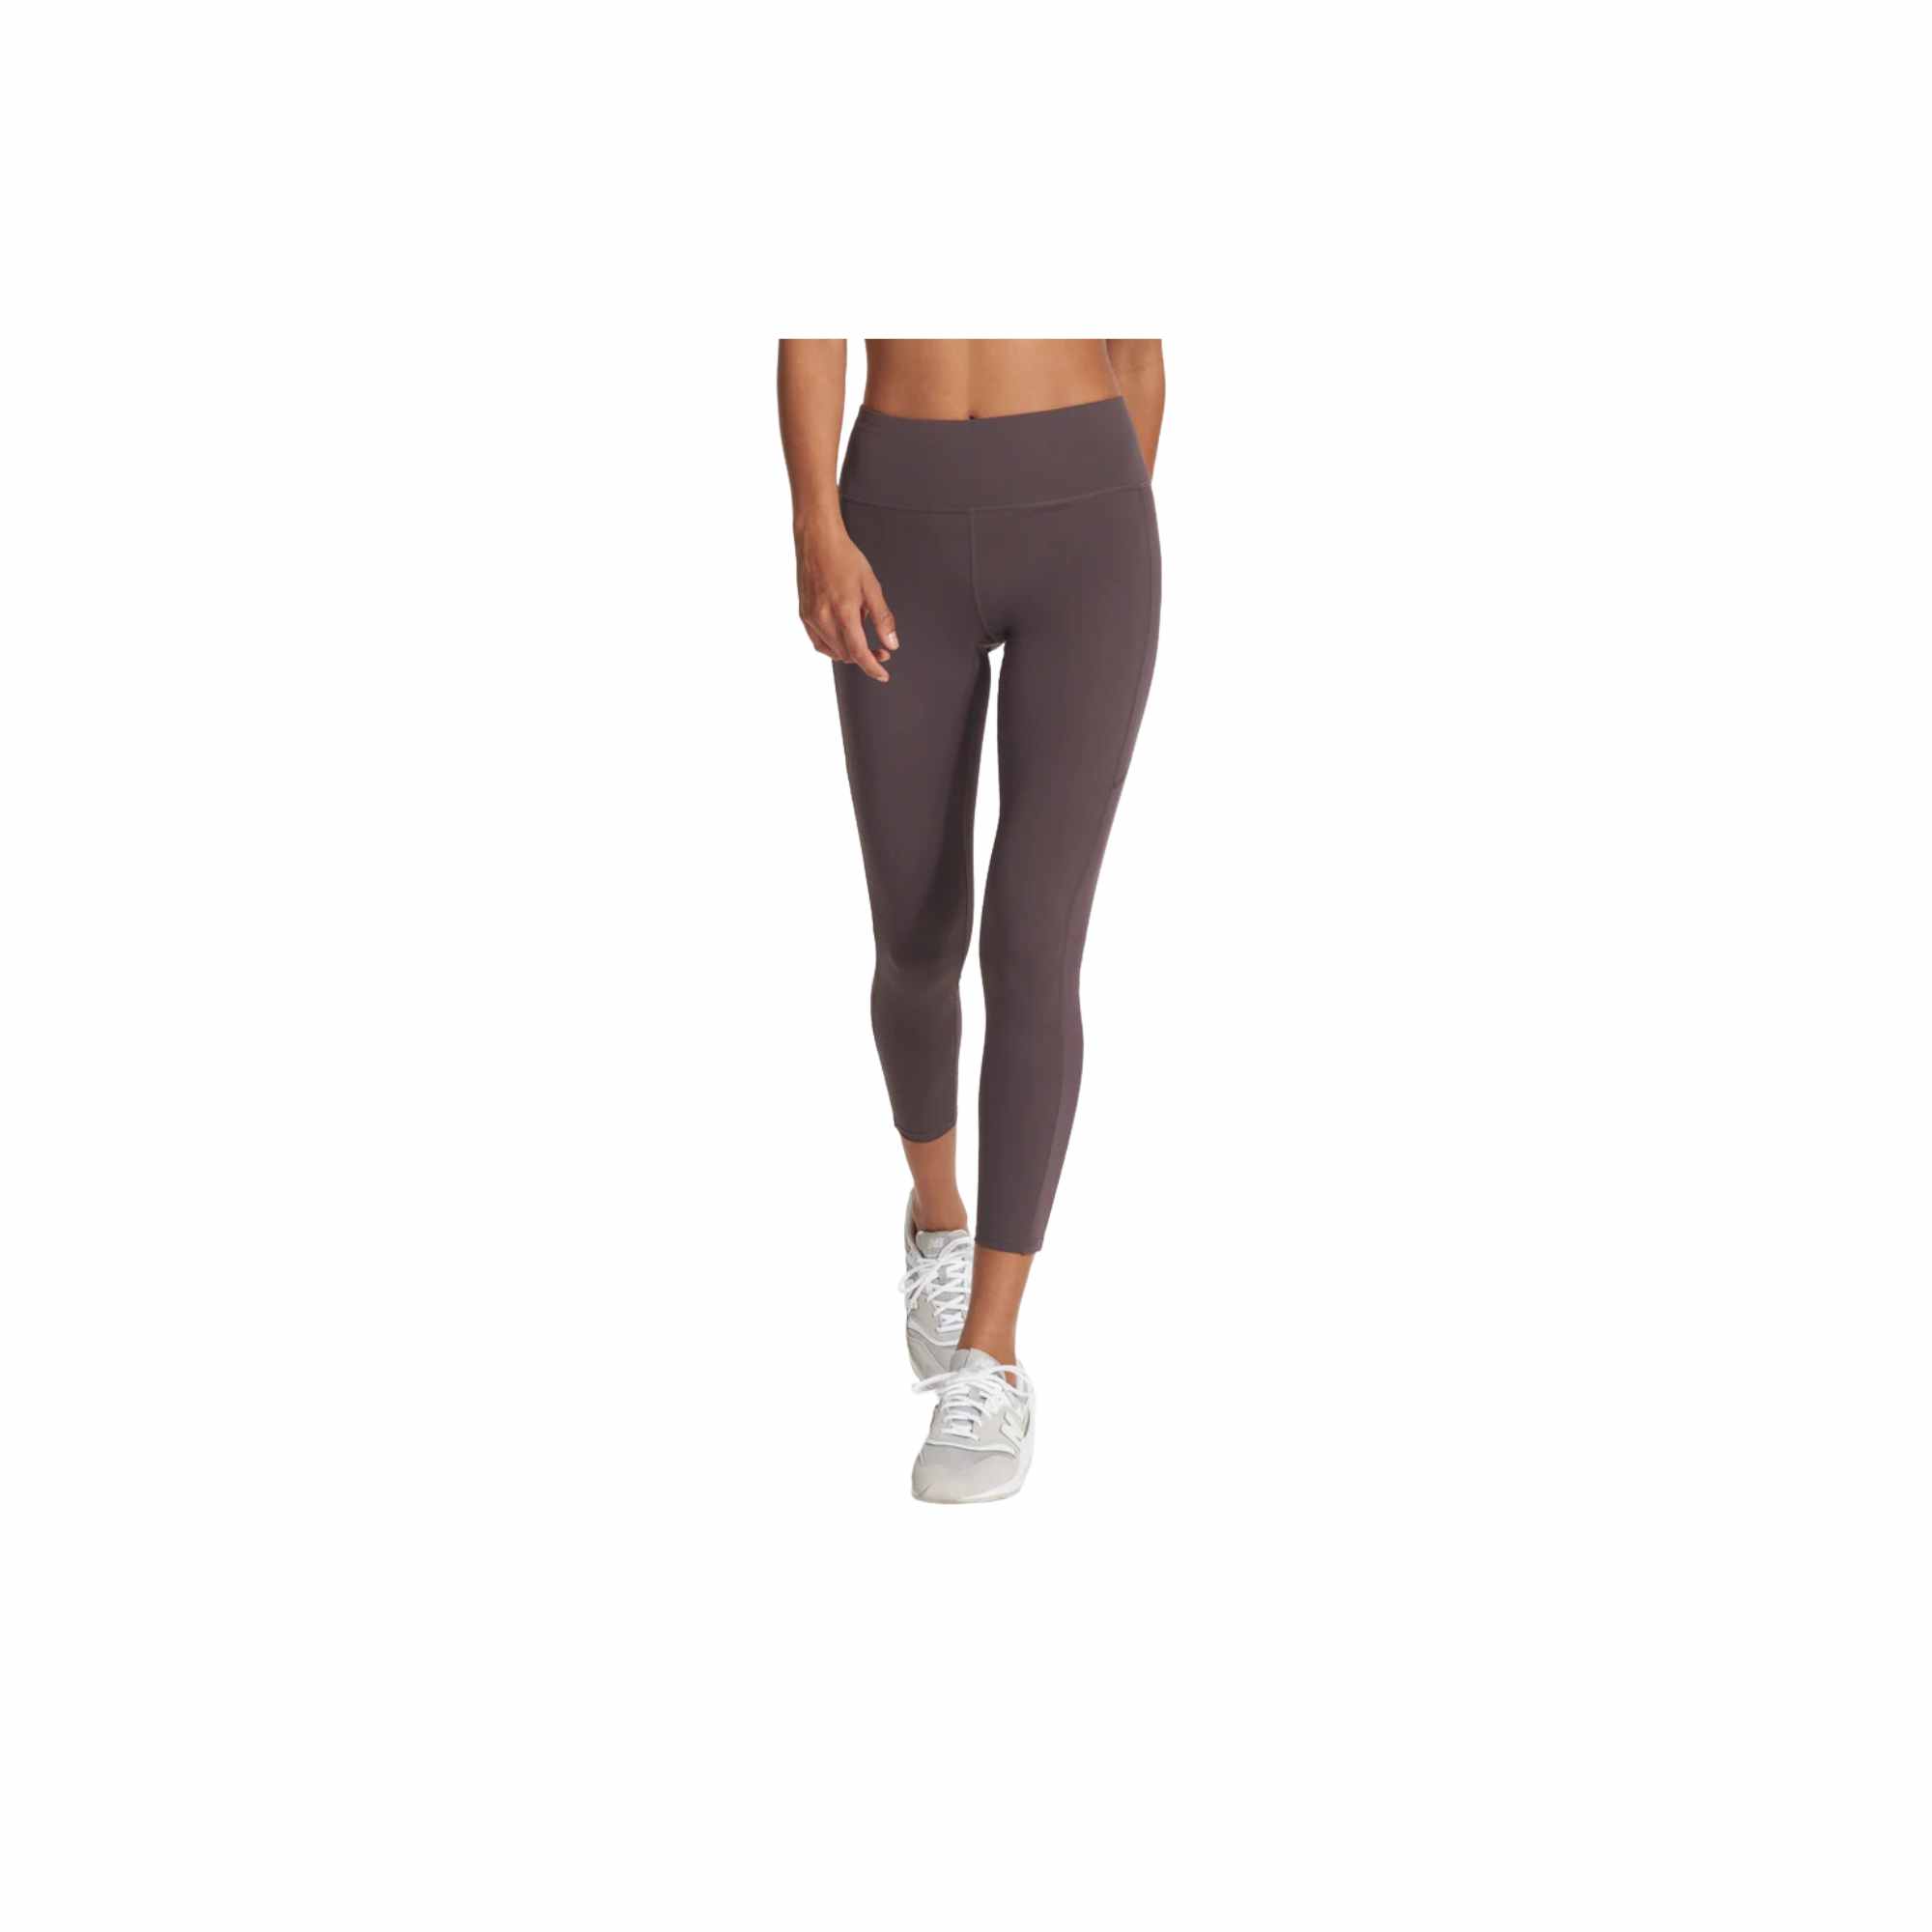 NUX For the Frill 7/8 Legging at EverydayYoga.com - Free Shipping